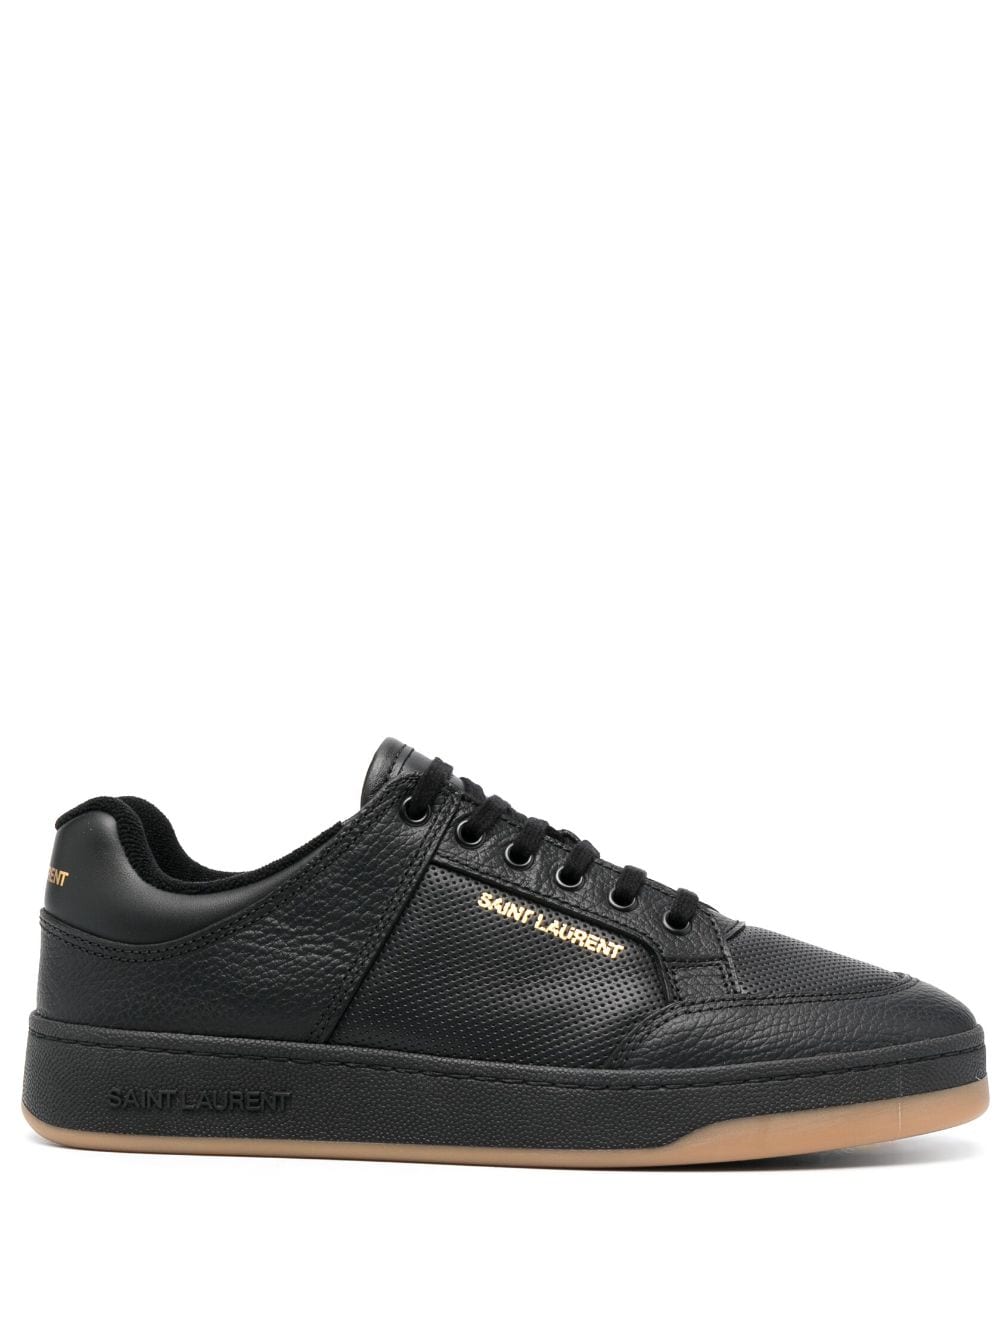 SL/61 leather perforated sneakers